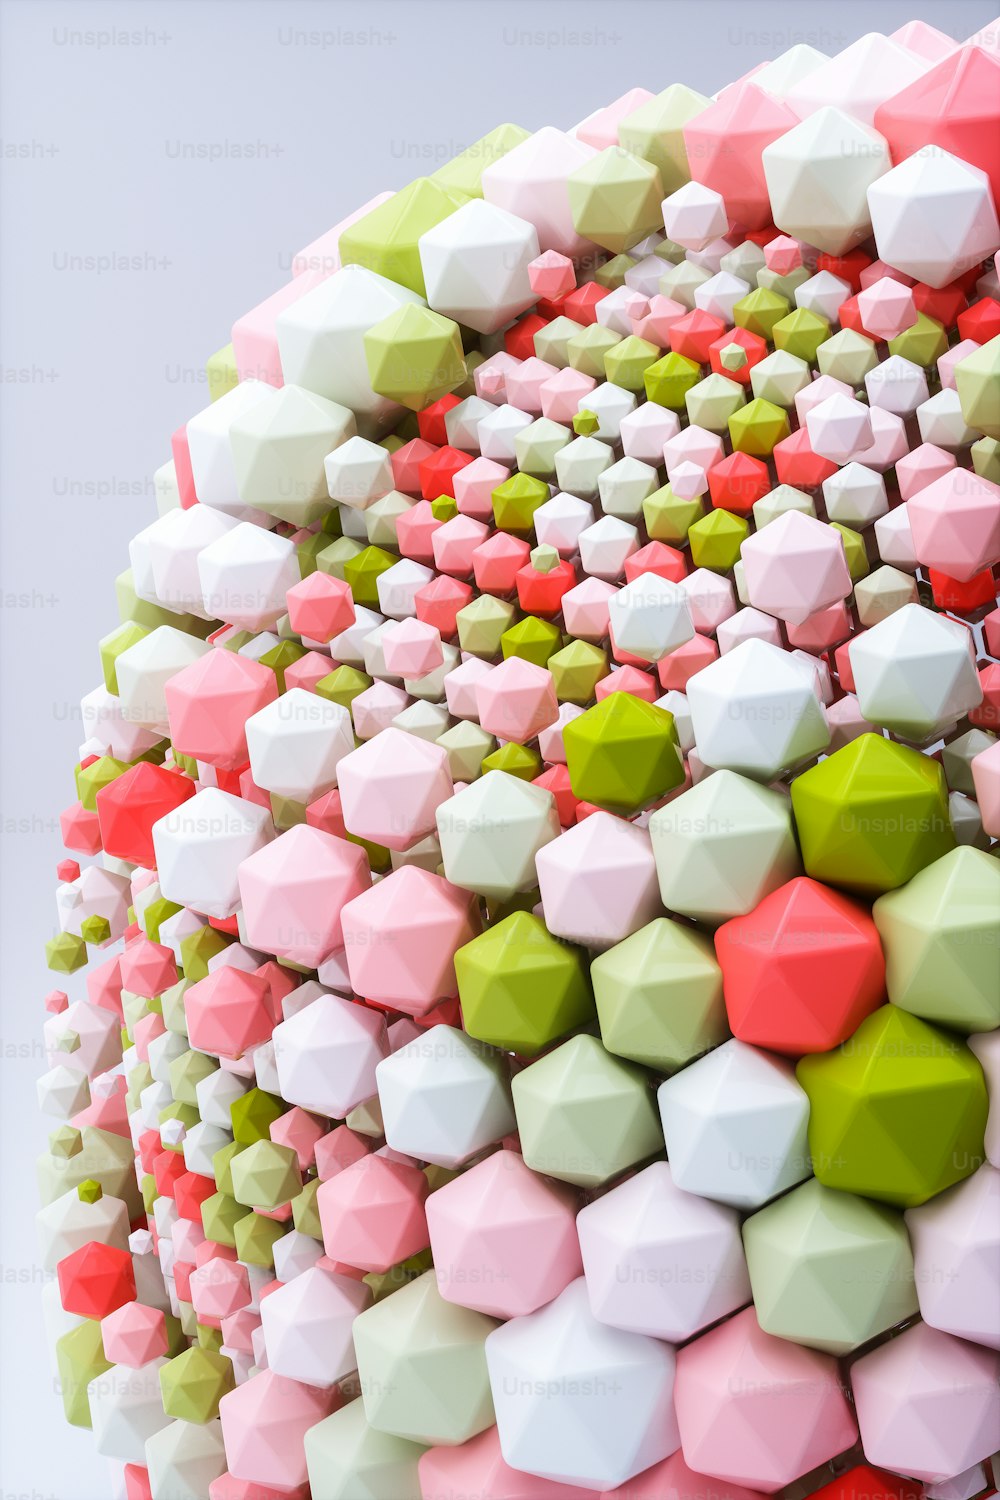 a colorful sculpture made of cubes and hexagonal shapes